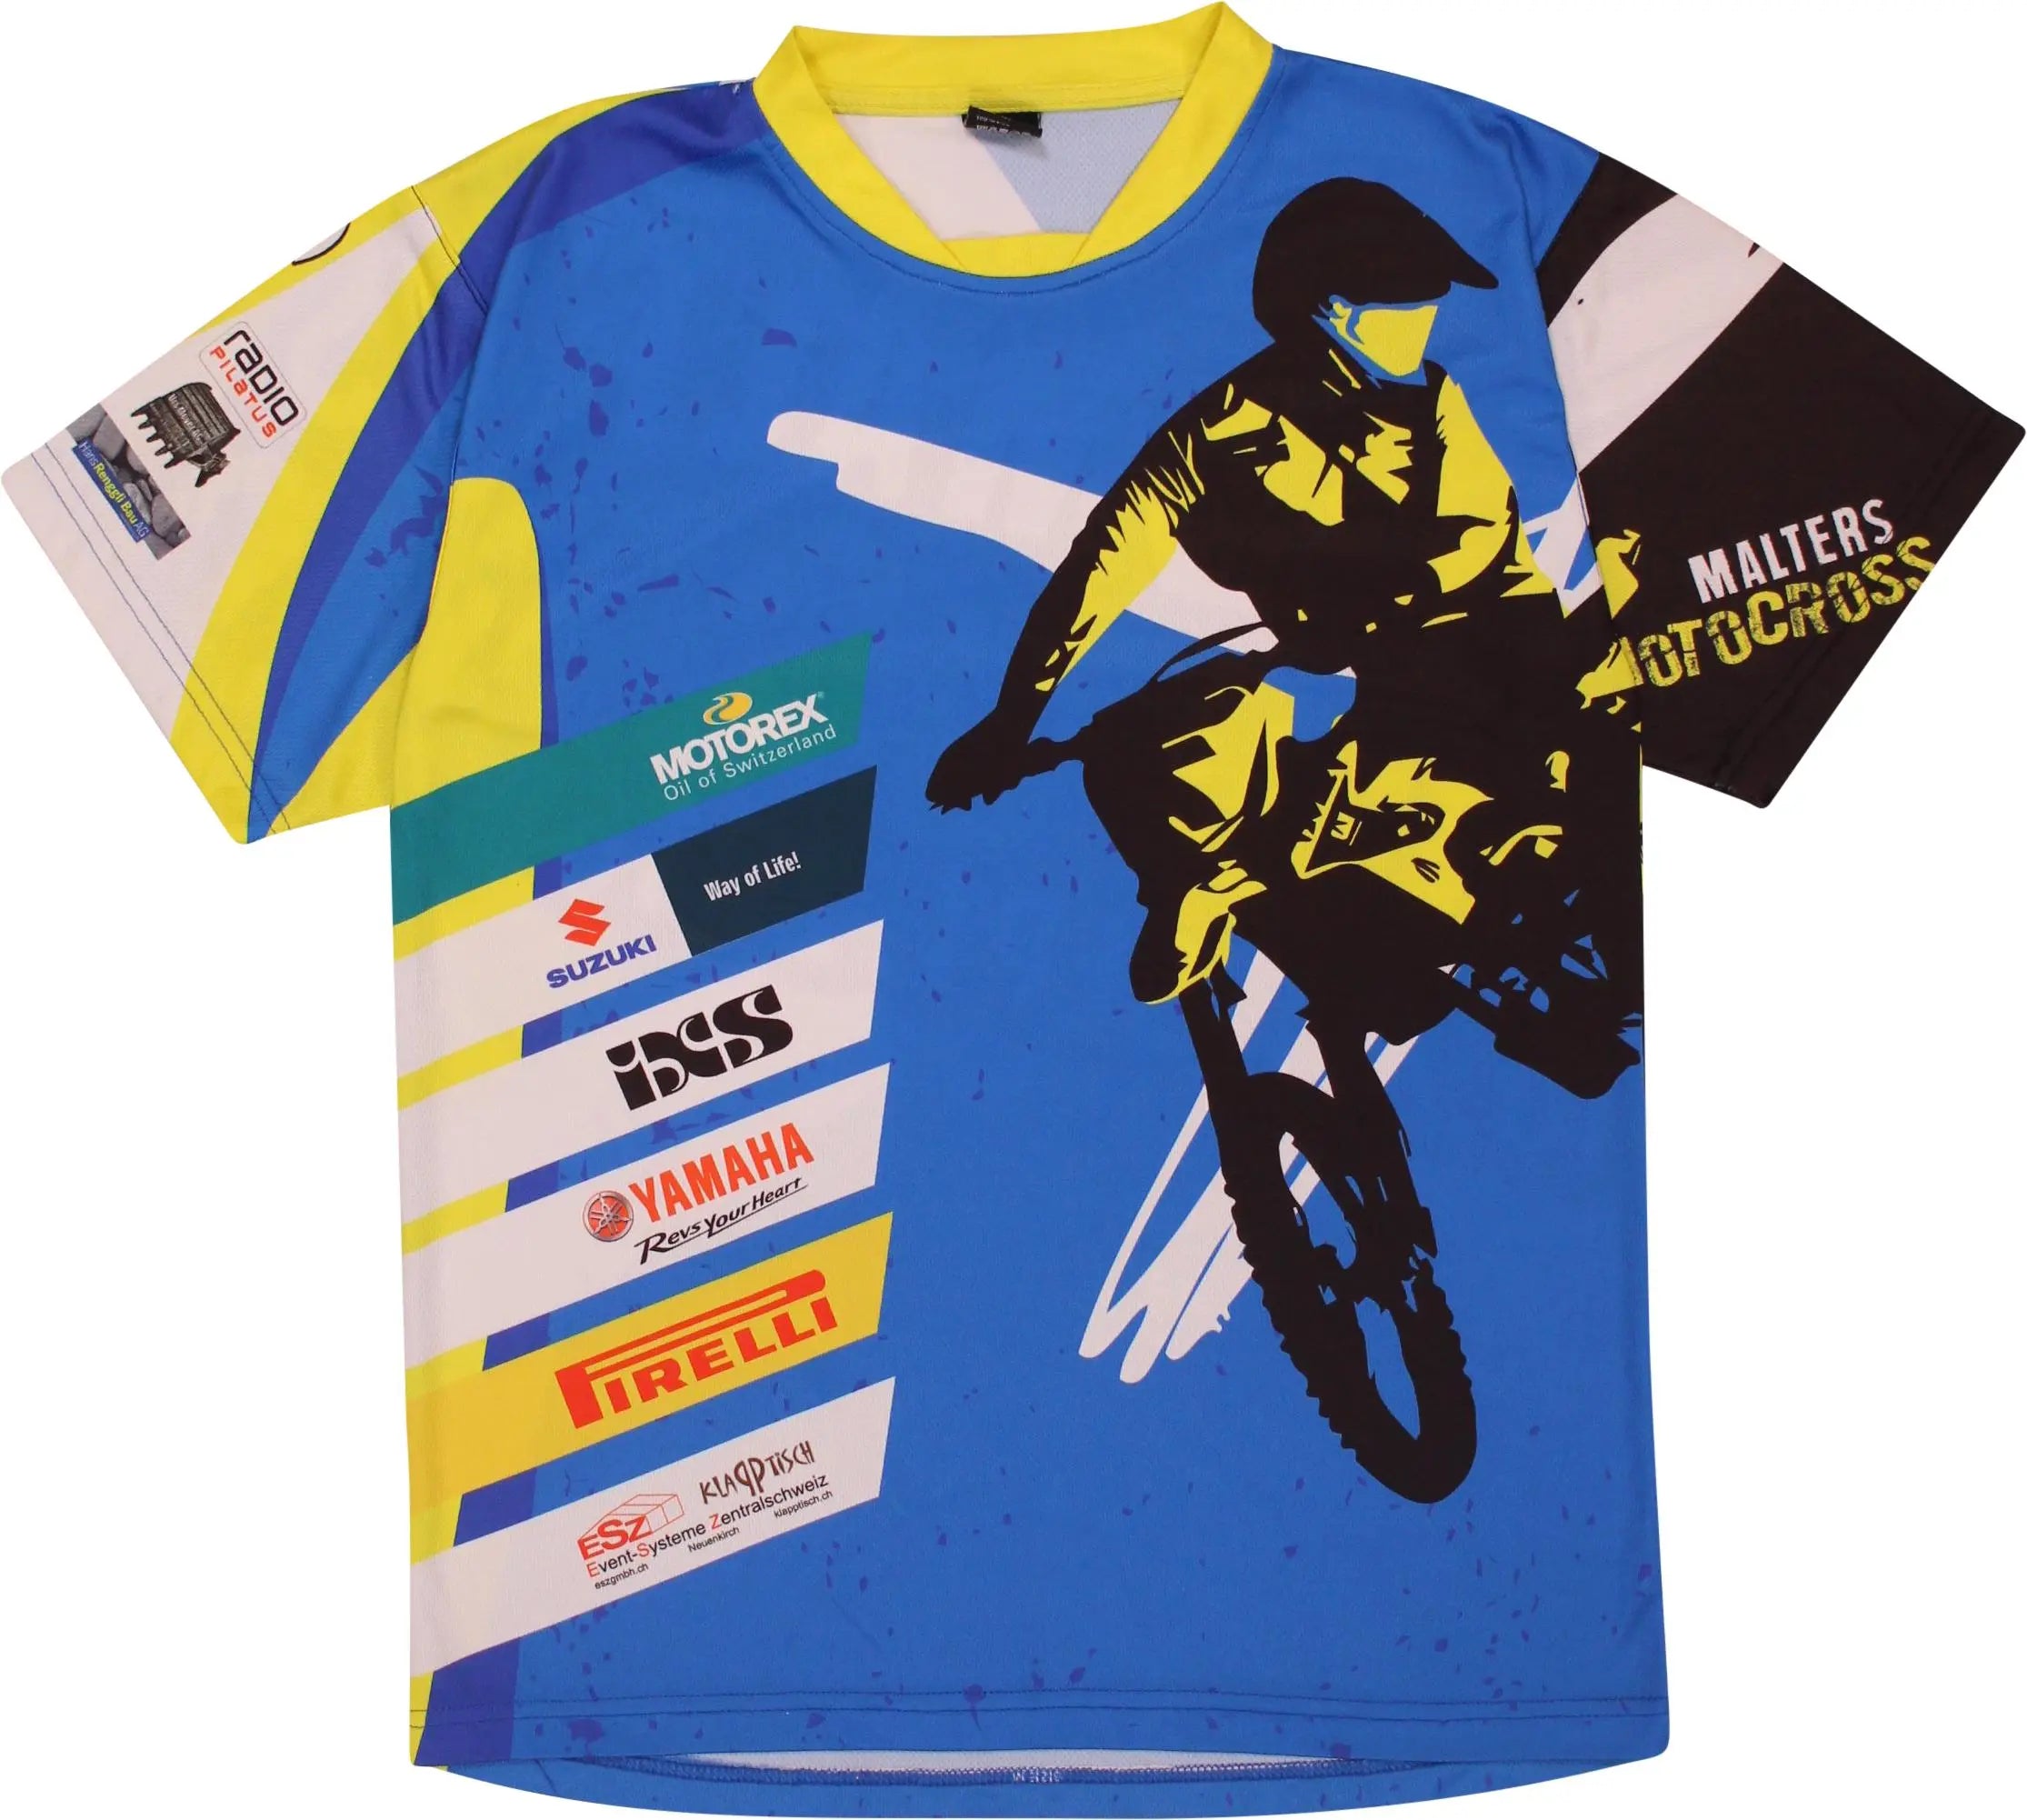 Unihockey Center - Malters Motorcross 2016 T-Shirt- ThriftTale.com - Vintage and second handclothing